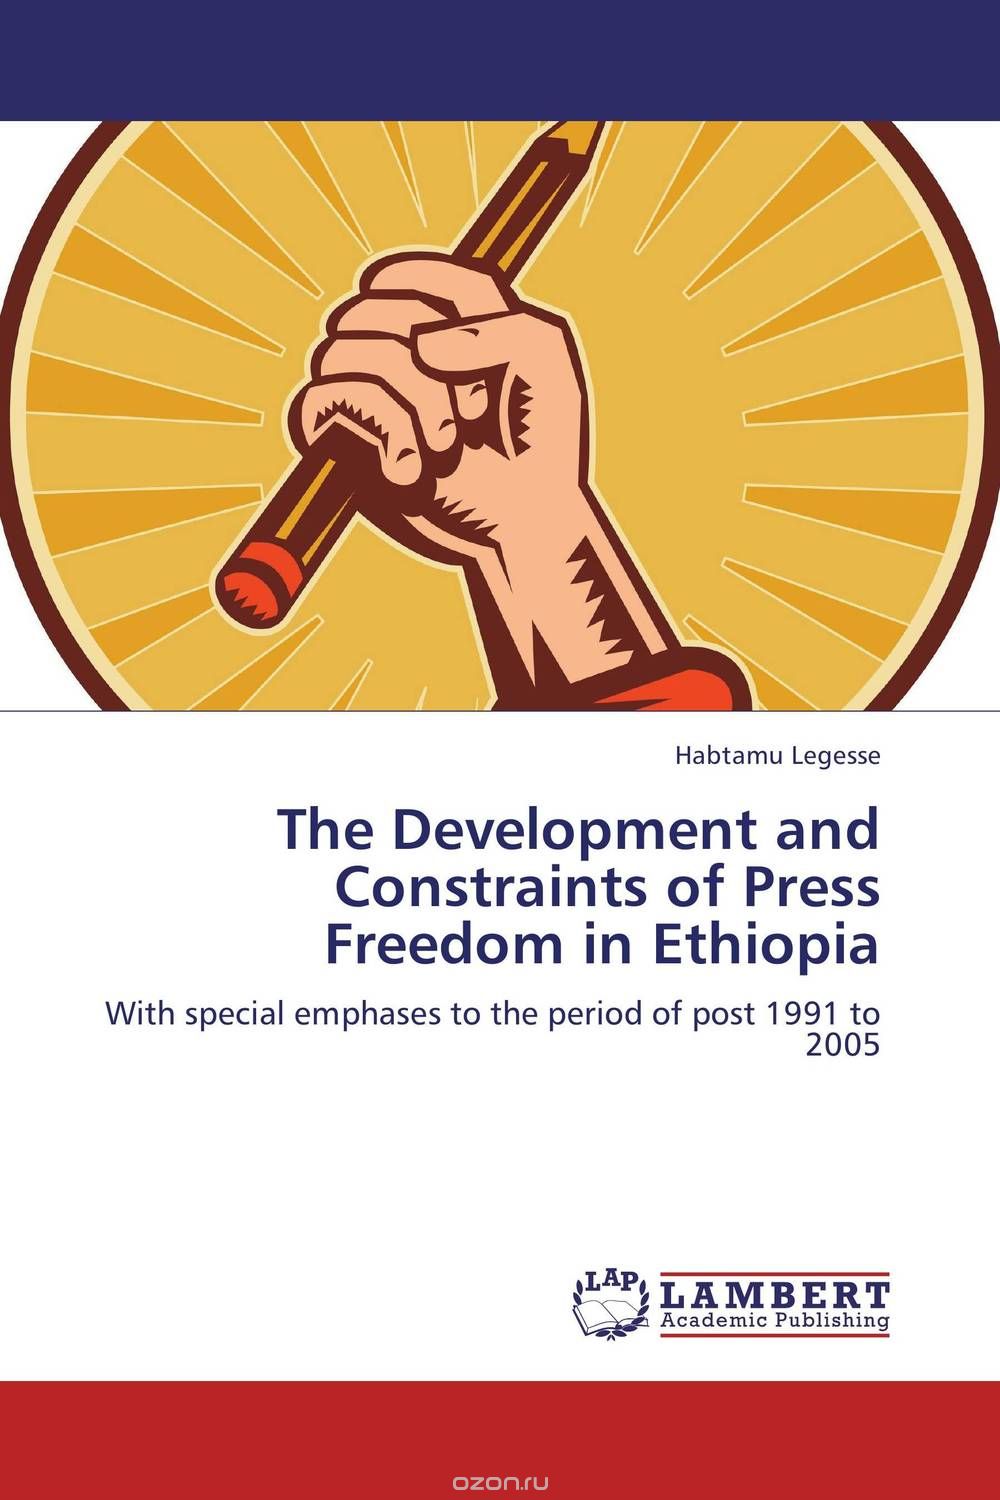 The Development and Constraints of Press Freedom in Ethiopia